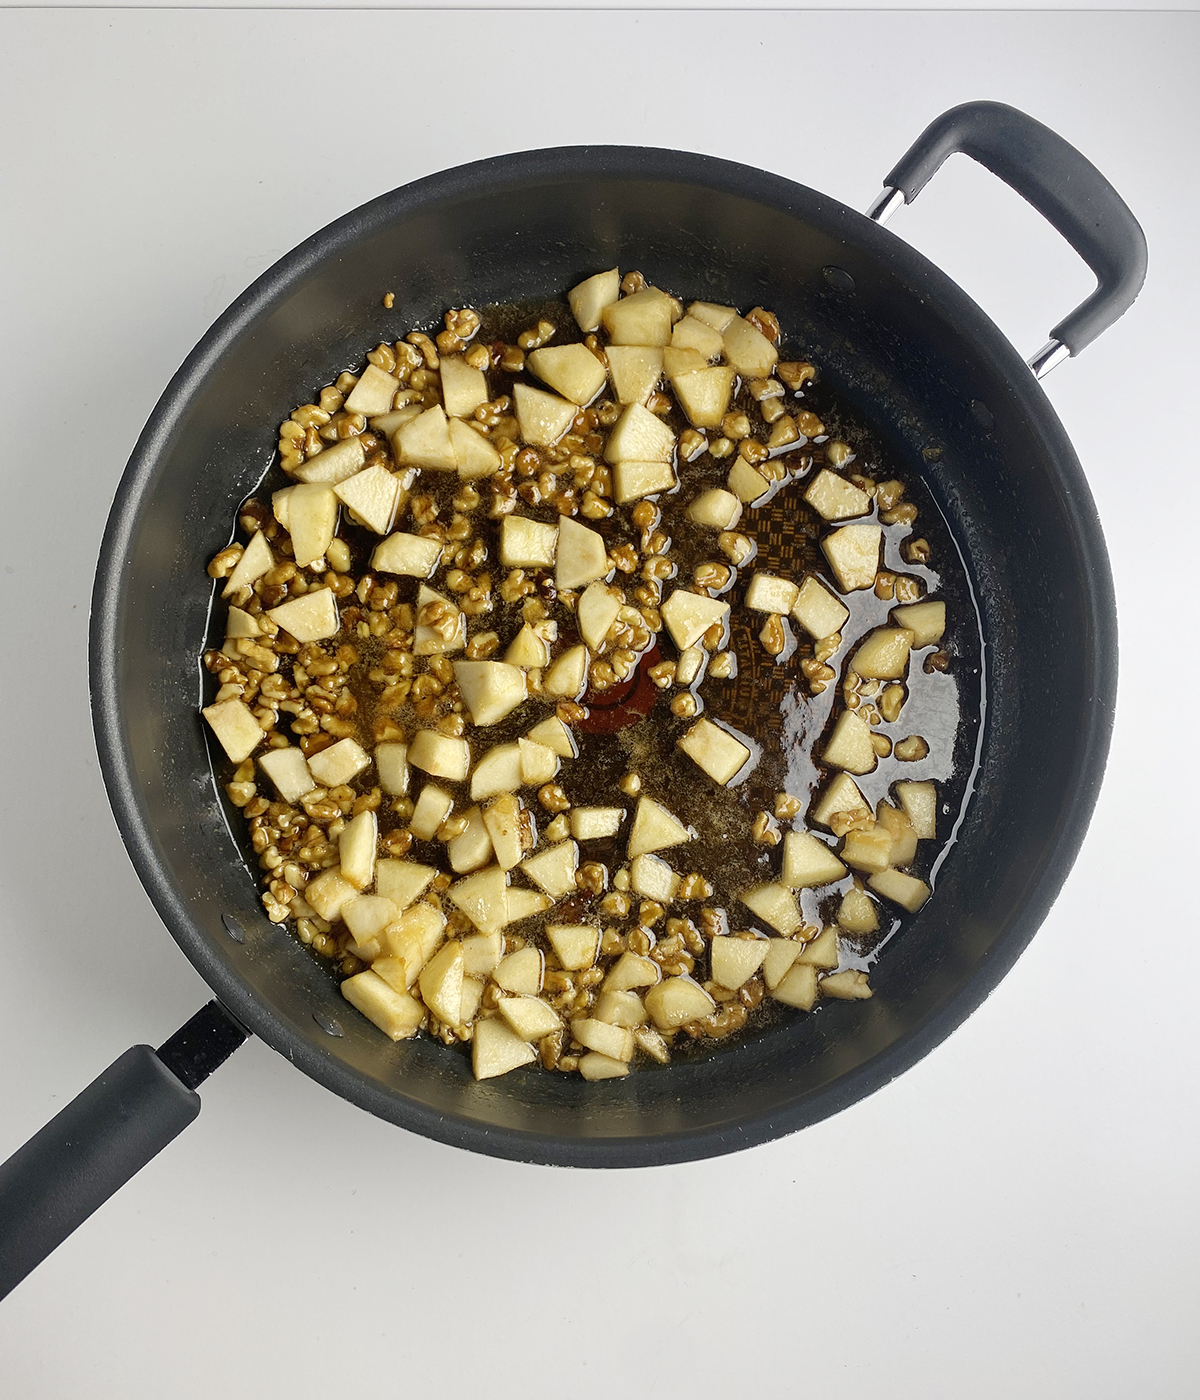 Apples with walnuts and maple syrup and brown sugar cooking in skillet.